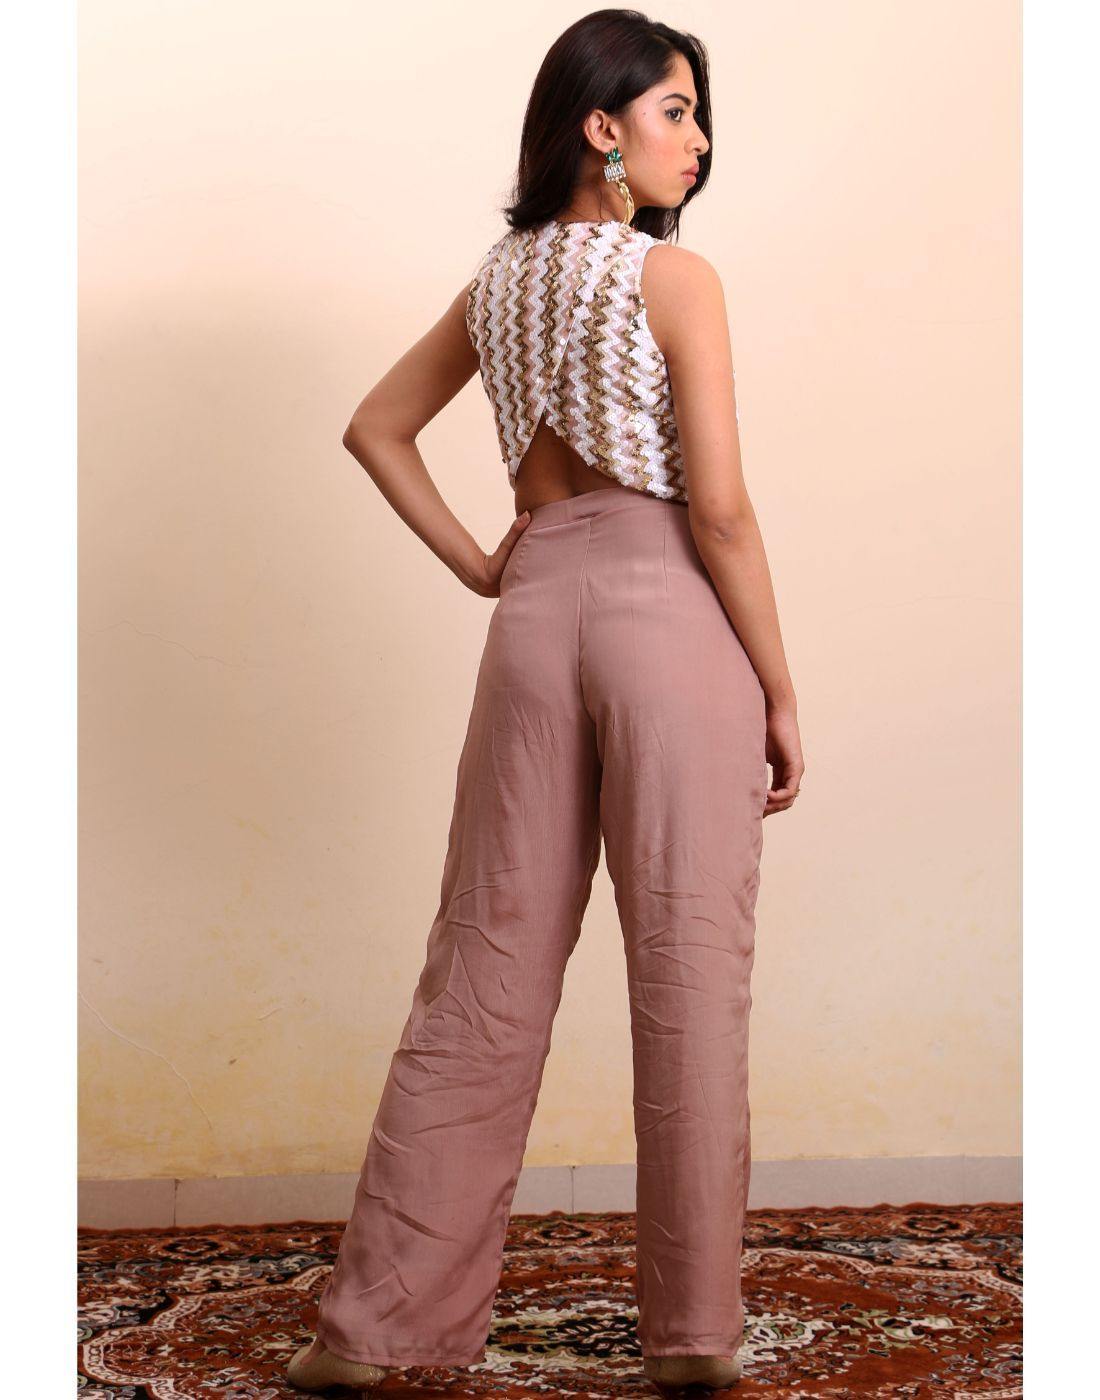 Palazzos - Buy Indo Western Palazzo Pants Online for Women in India - Indya